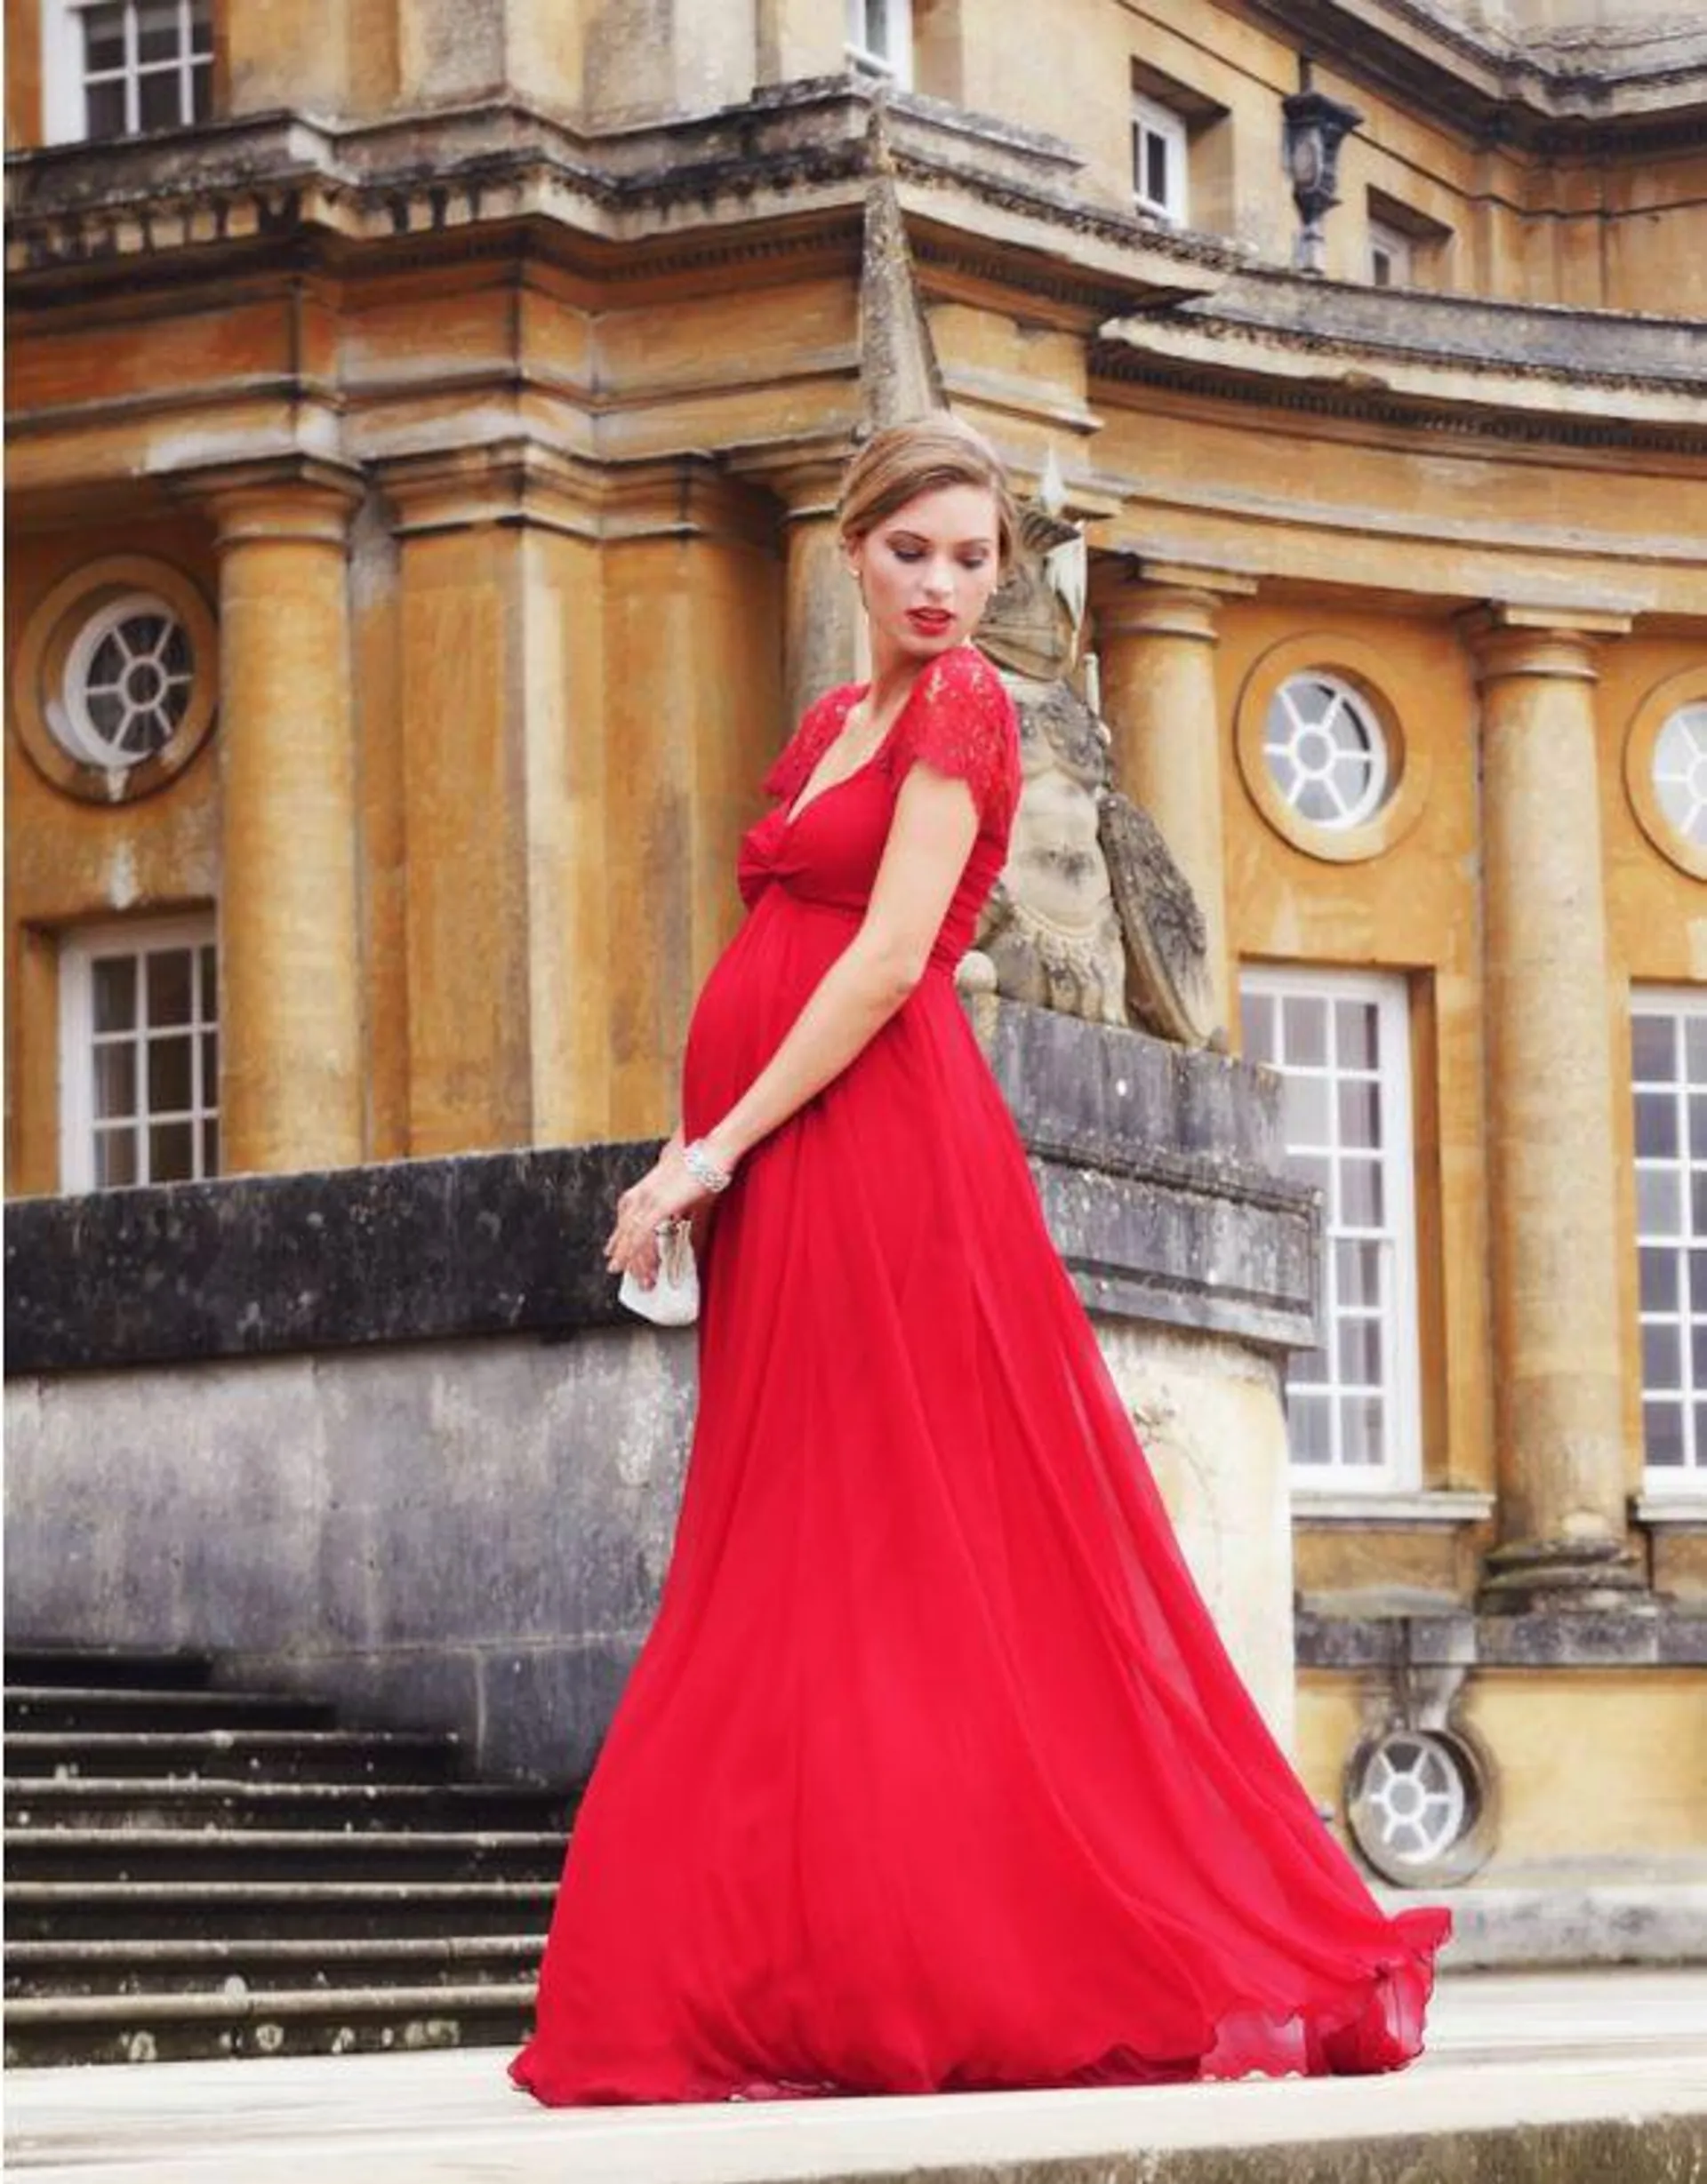 Scarlet Silk & Lace Maternity Evening Gown